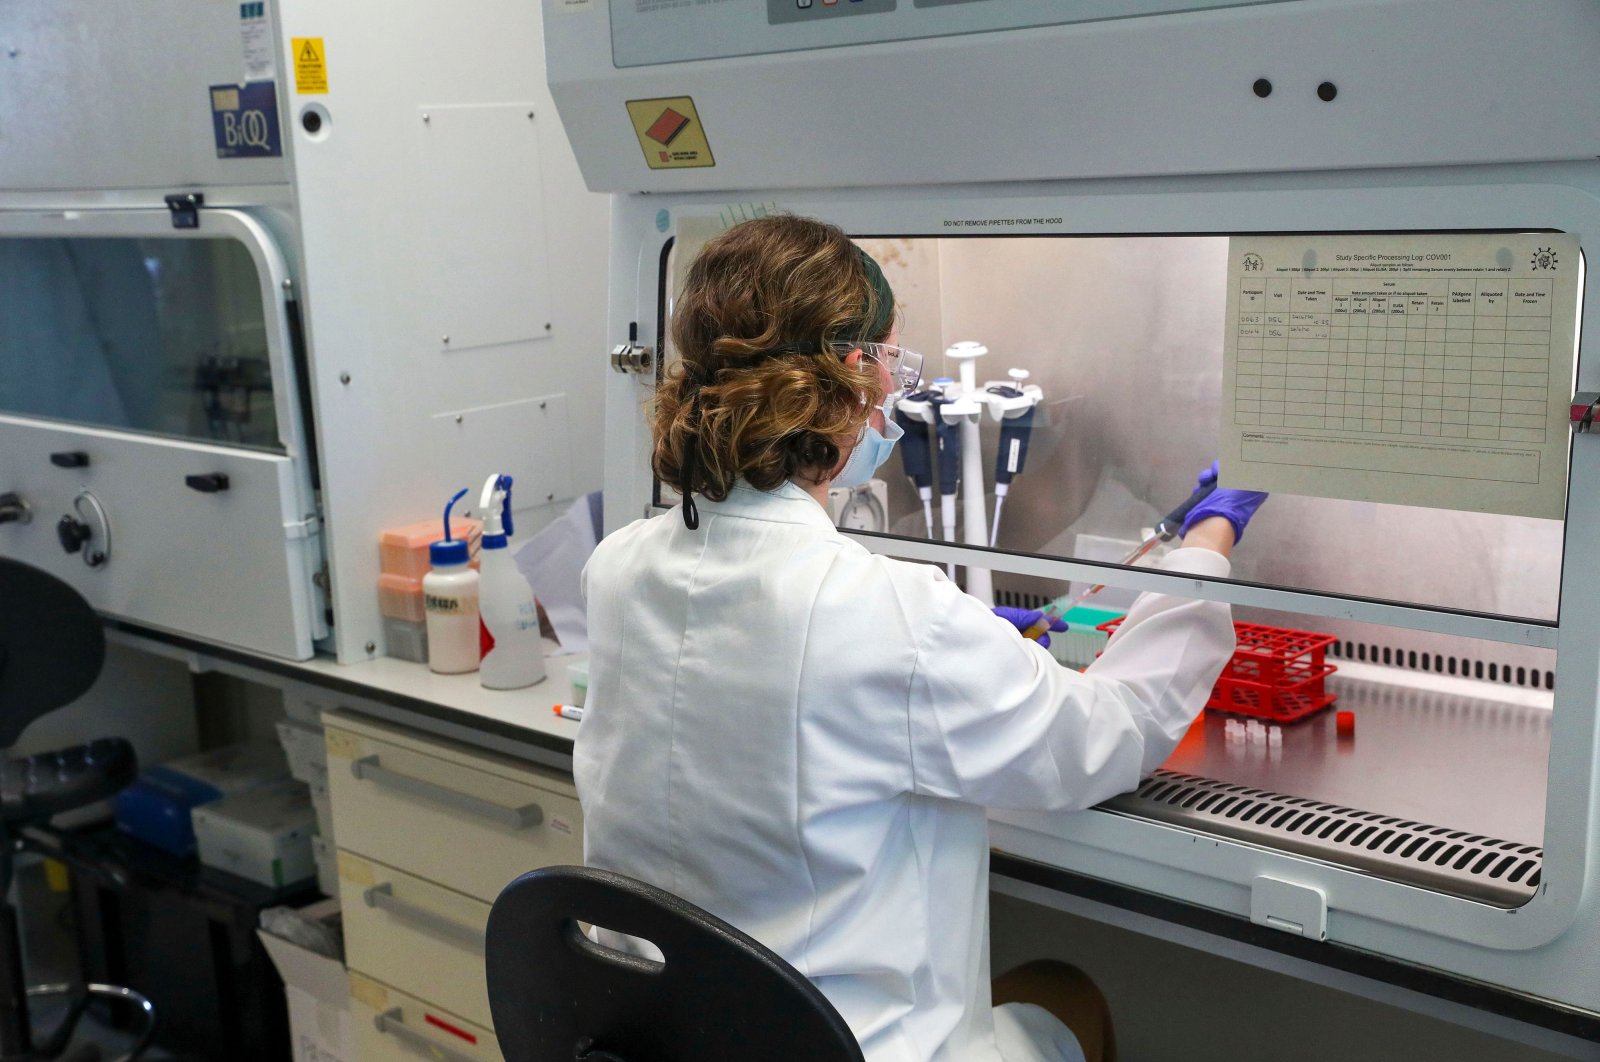 A scientist is pictured working during a visit by Britain's Prince William, Duke of Cambridge (unseen), to Oxford Vaccine Group's laboratory facility at the Churchill Hospital in Oxford, west of London on June 24, 2020, on his visit to learn more about the group's work to establish a viable vaccine against coronavirus COVID-19. (AFP Photo)